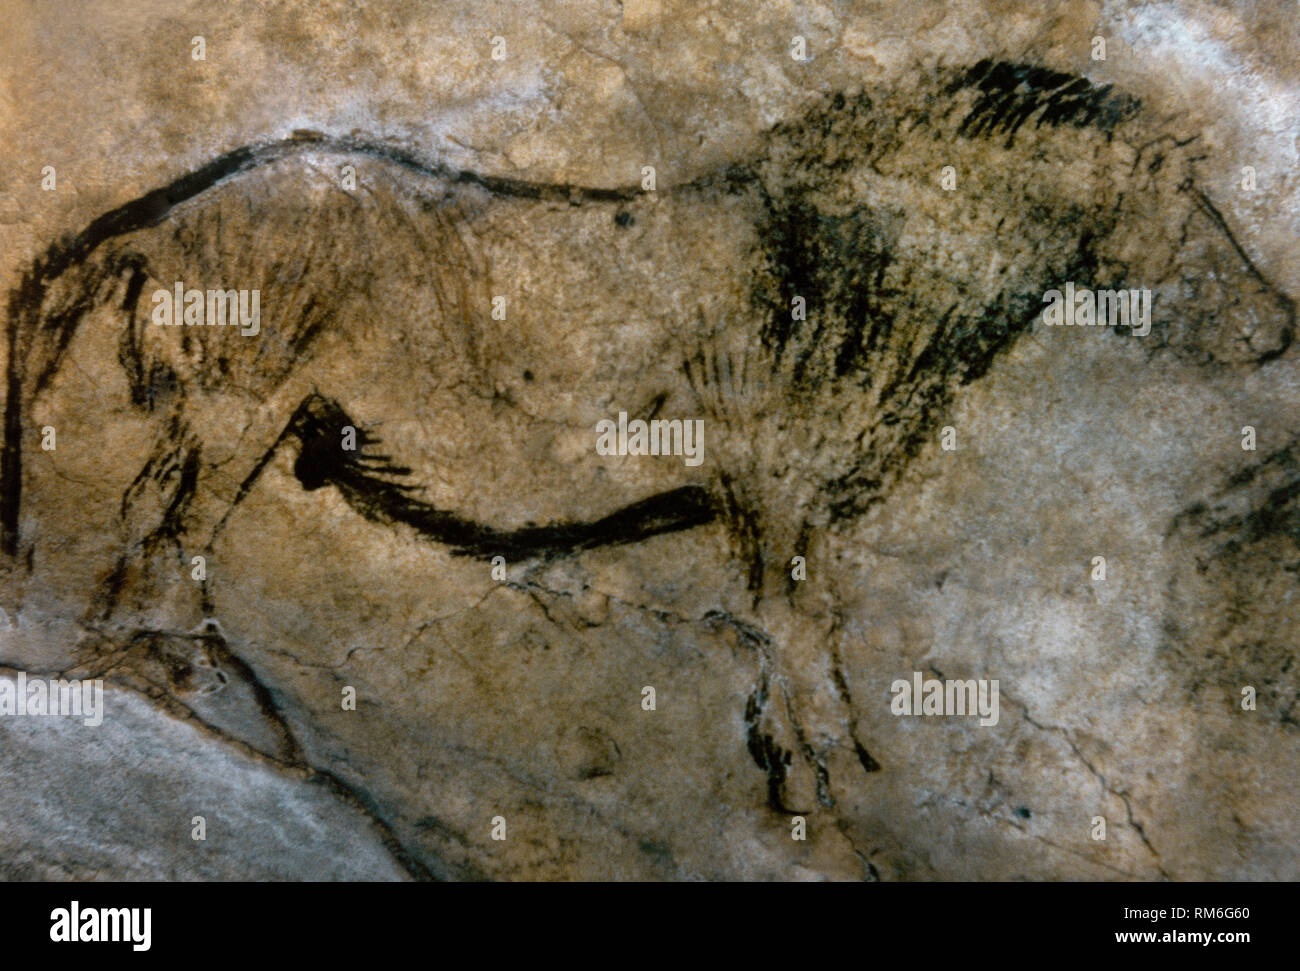 Cave of Niaux. Black Hall panel. Painting depicting a horse, executed in a Black-outlined style. Late Upper Paleolithic. Magdalenian Culture, c. 13.000 BCE. Ariege, southwestern France. Europe. Stock Photo